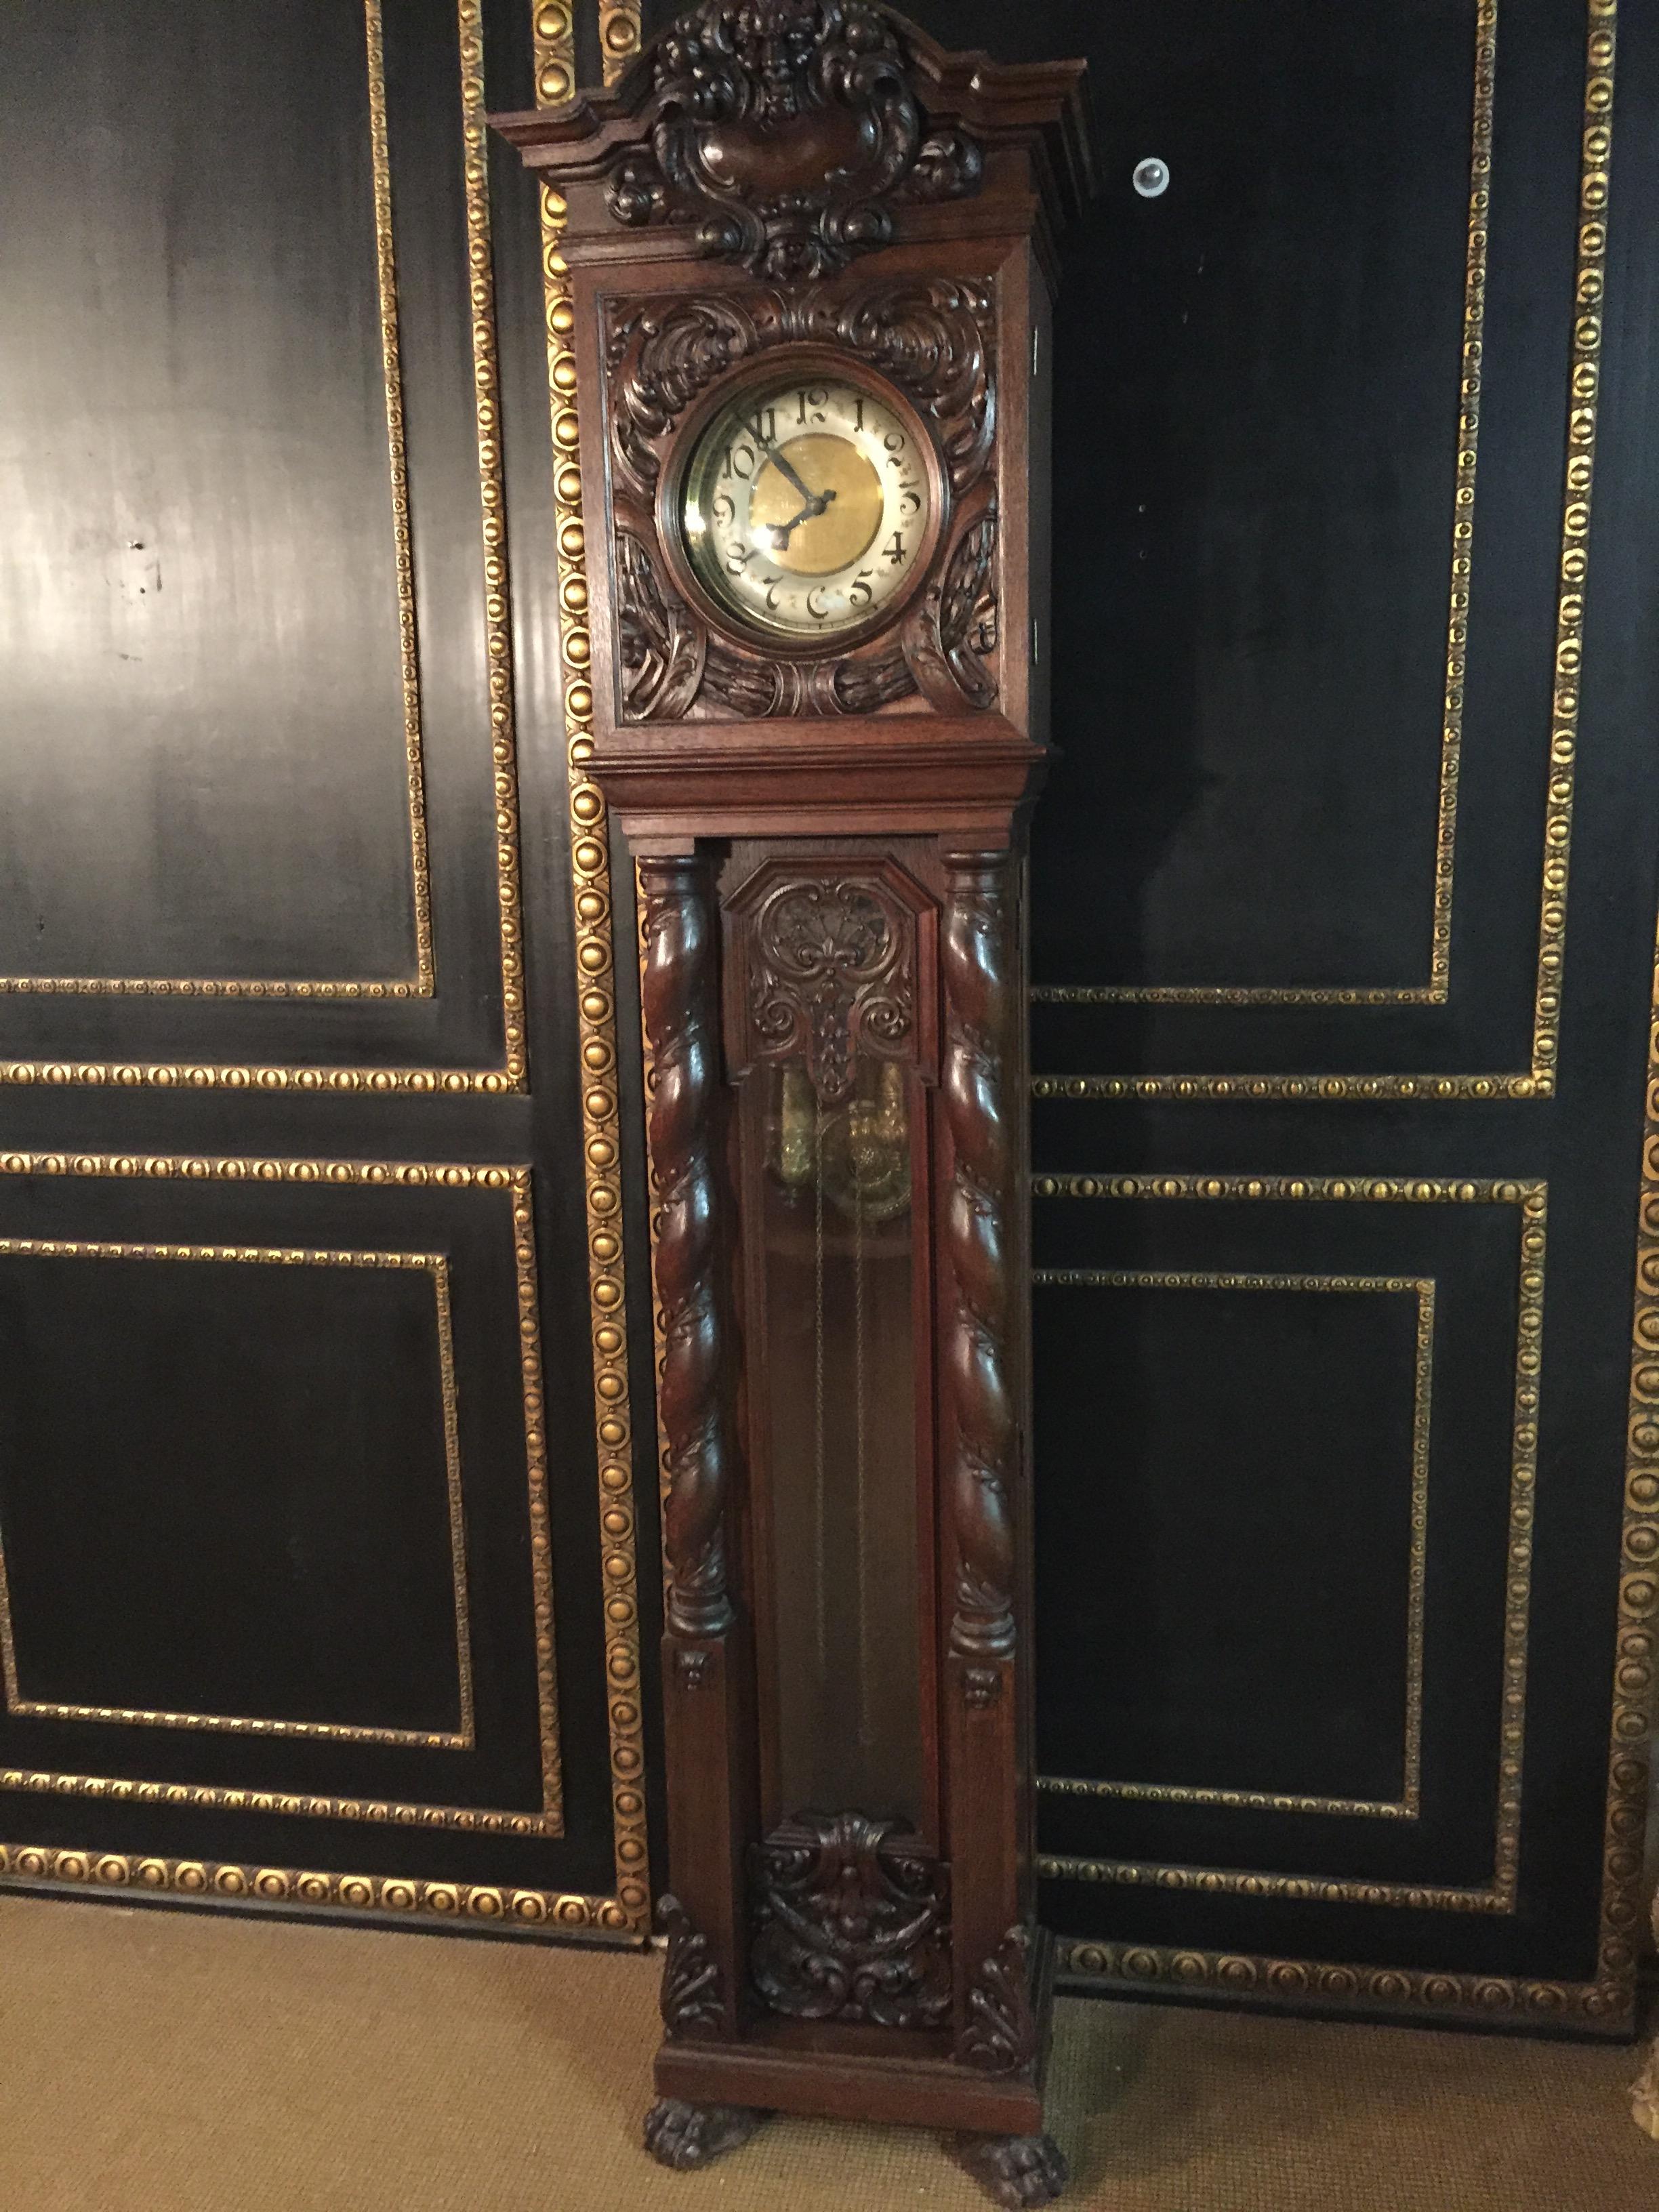 Fully carved grandfather clock, circa 1870.
In the front a glass door framed by 2 twisted columns.
On the side are glass doors.
2 weights with 1 pendulum.